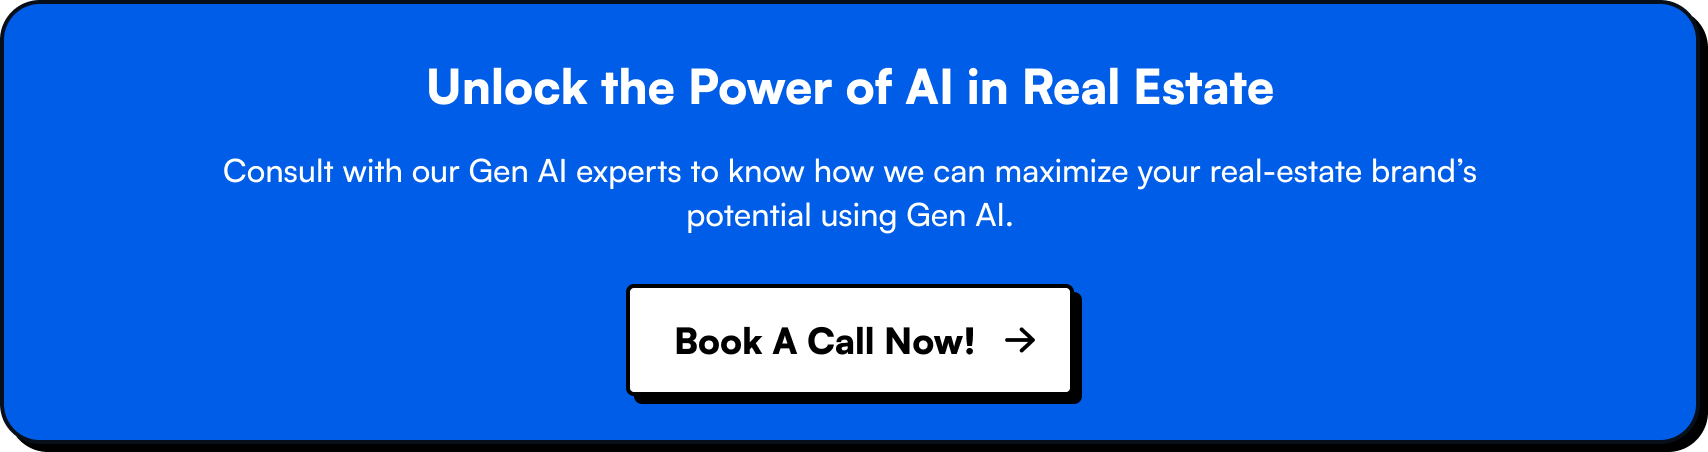 Unlock the Power of AI in Real Estate